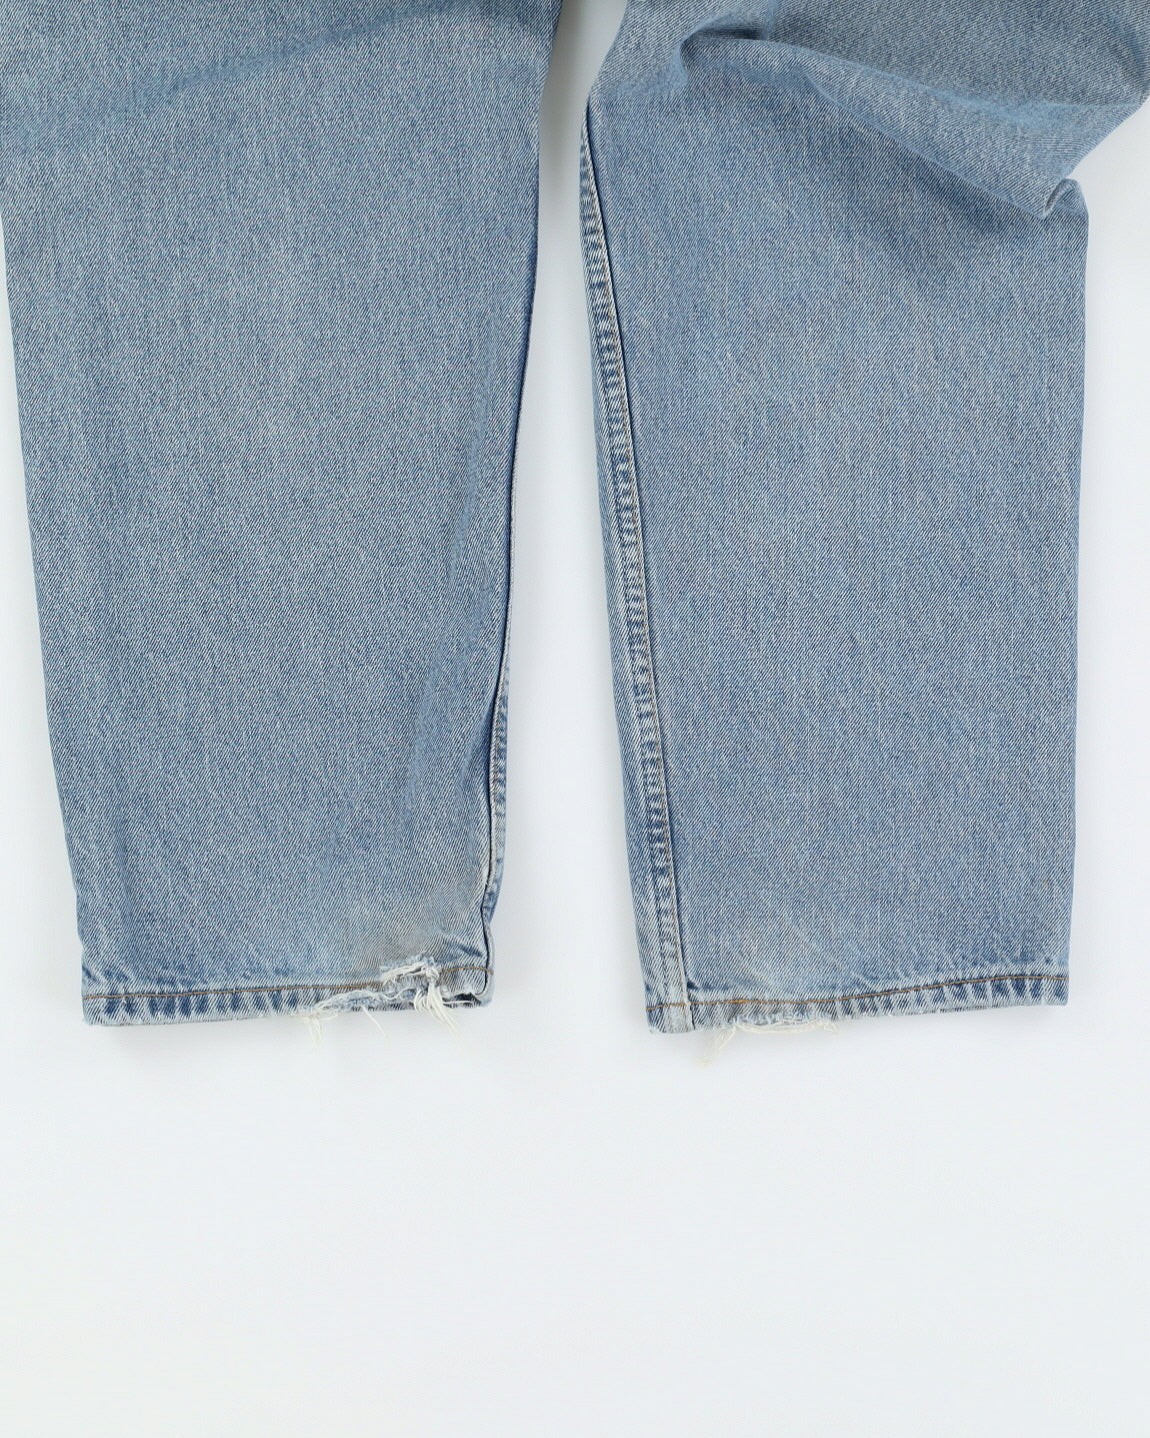 Vintage 90s Levi's Light Wash Relaxed Fit Jeans - W36 L30